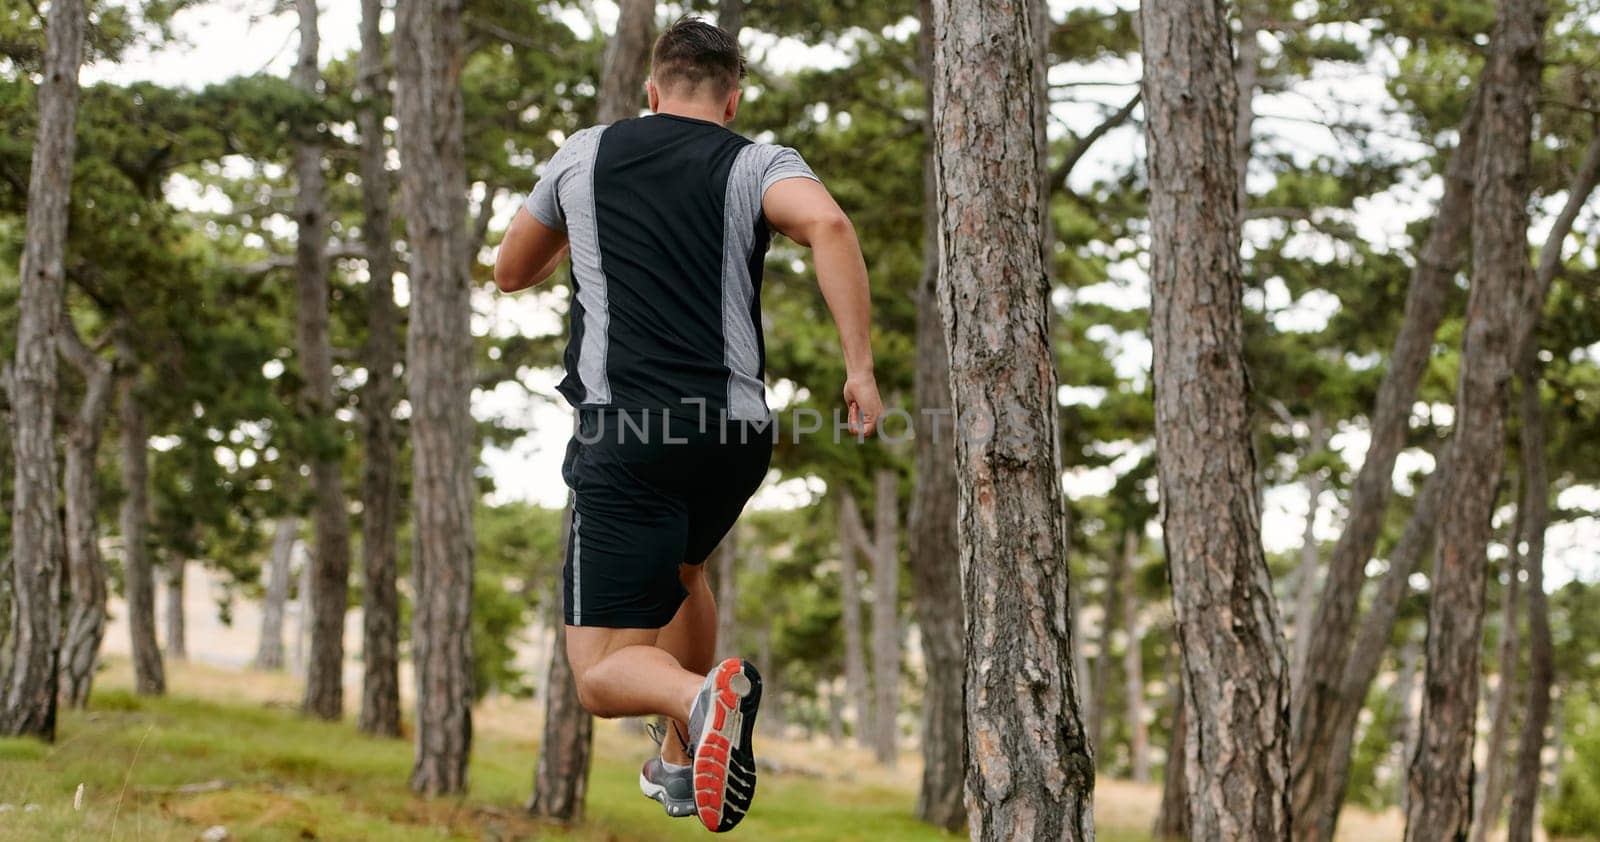 An unwavering man dashes through perilous forest paths, skillfully hurdling over wooden obstacles with determination and agility, epitomizing courage and athleticism